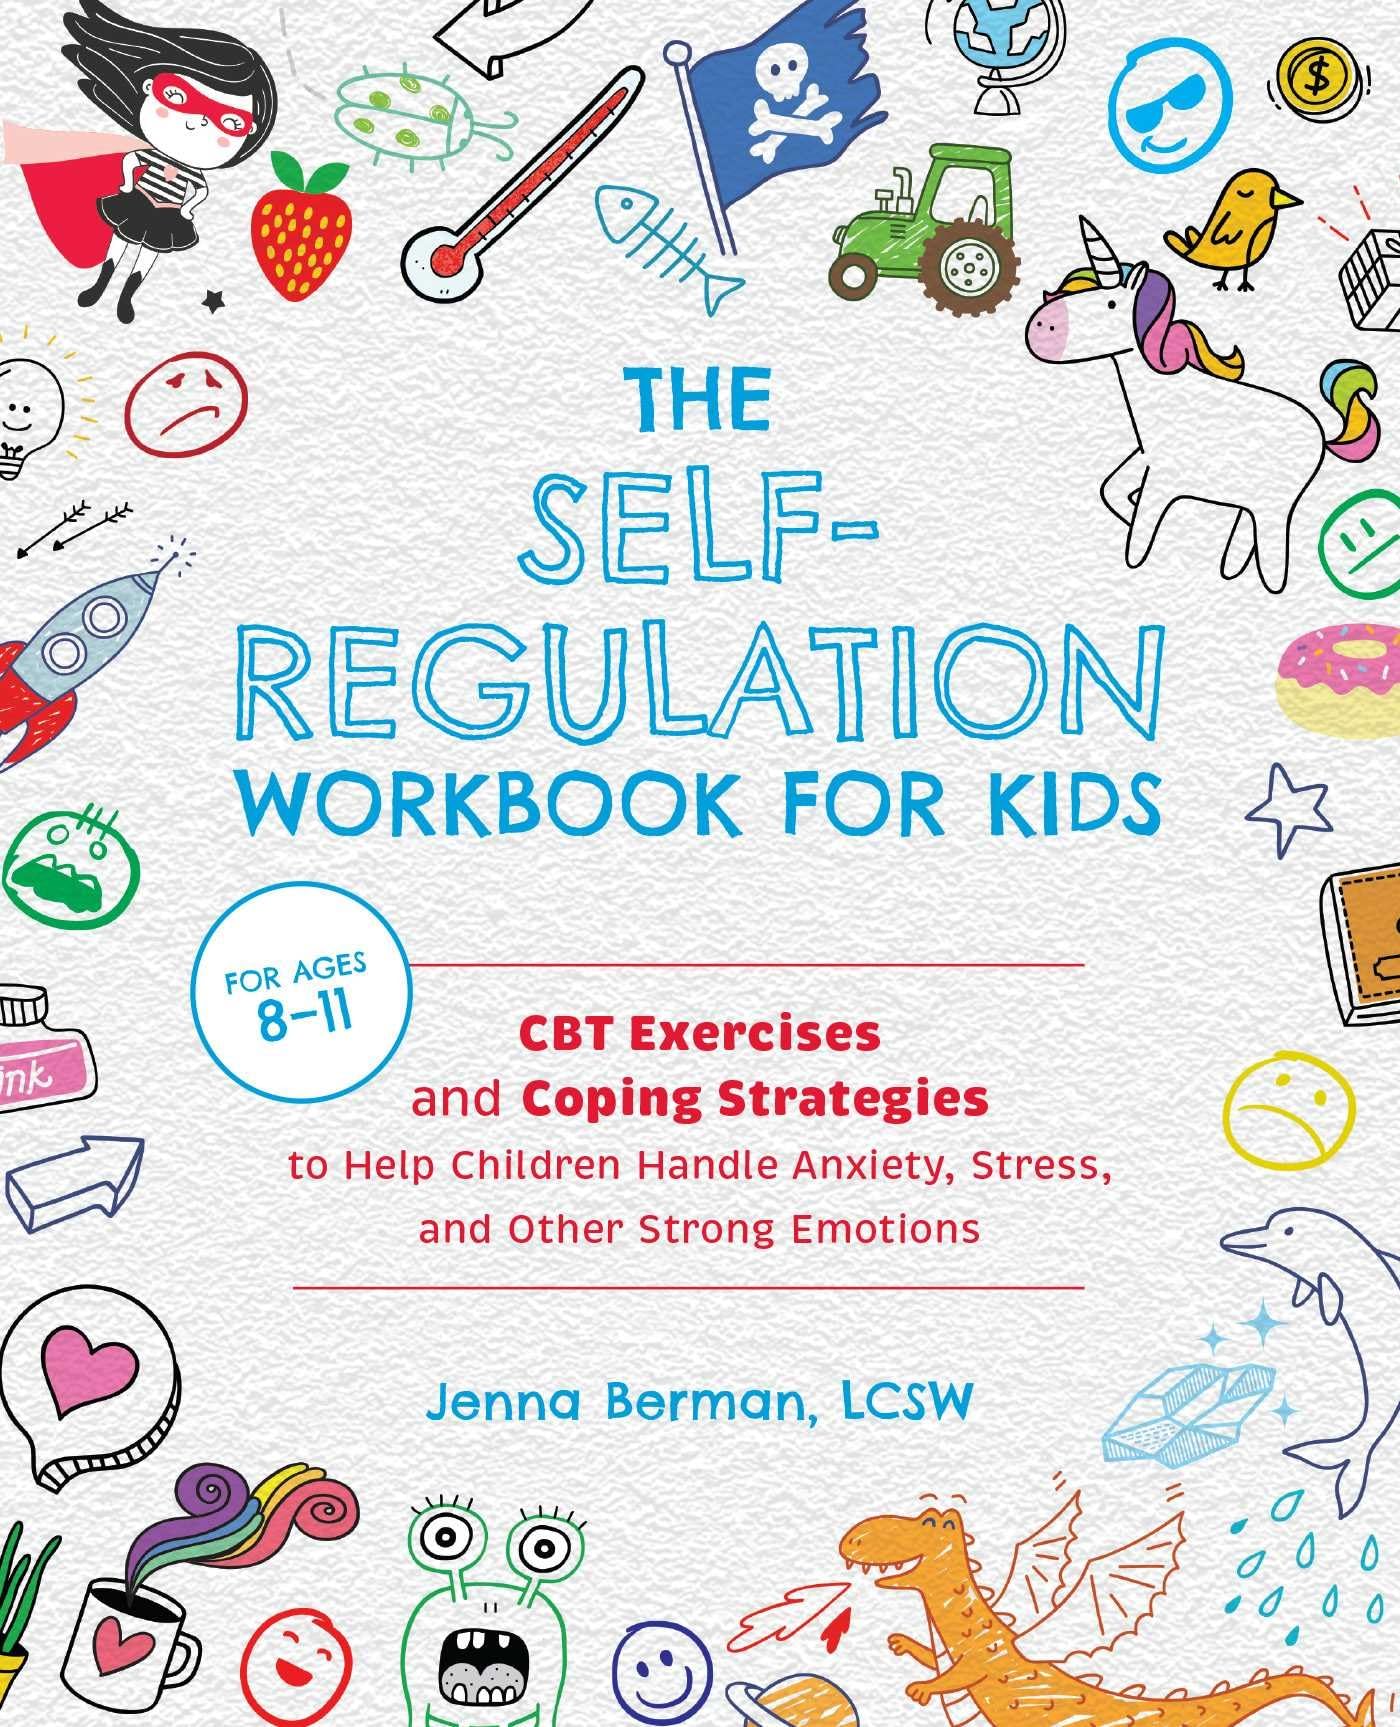 The Self-Regulation Workbook for Kids: CBT Exercises and Coping Strategies to Help Children Handle Anxiety, Stress, and Other Strong Emotions by Berman, Jenna